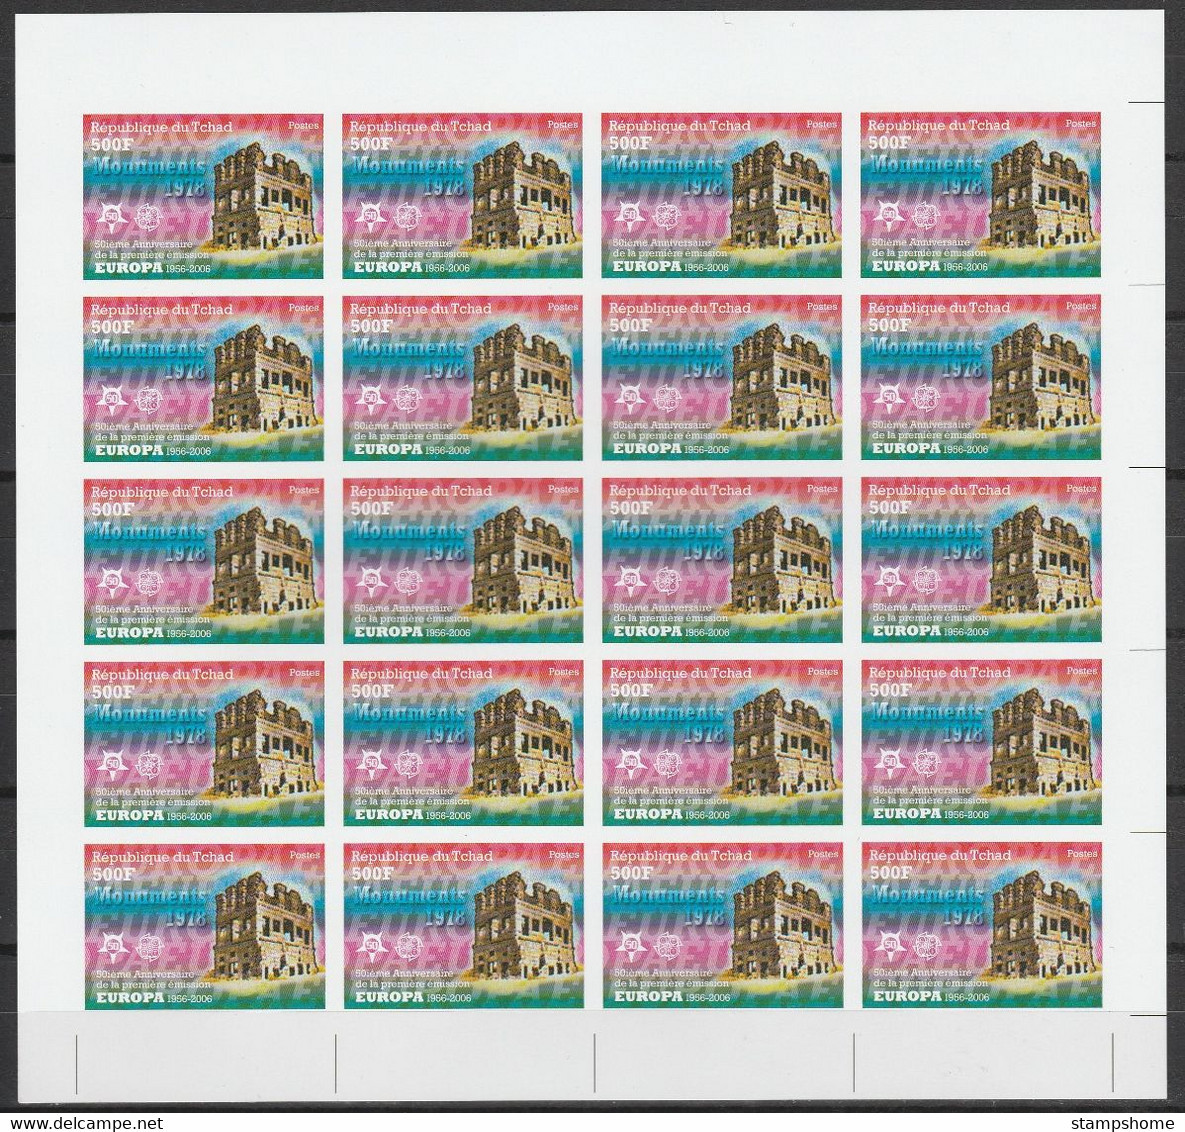 Europa Cept - 2005 - Tchad, Chad - 8.Complete Sheetlet Of 20 Sets - (imp.) ** MNH - 2005